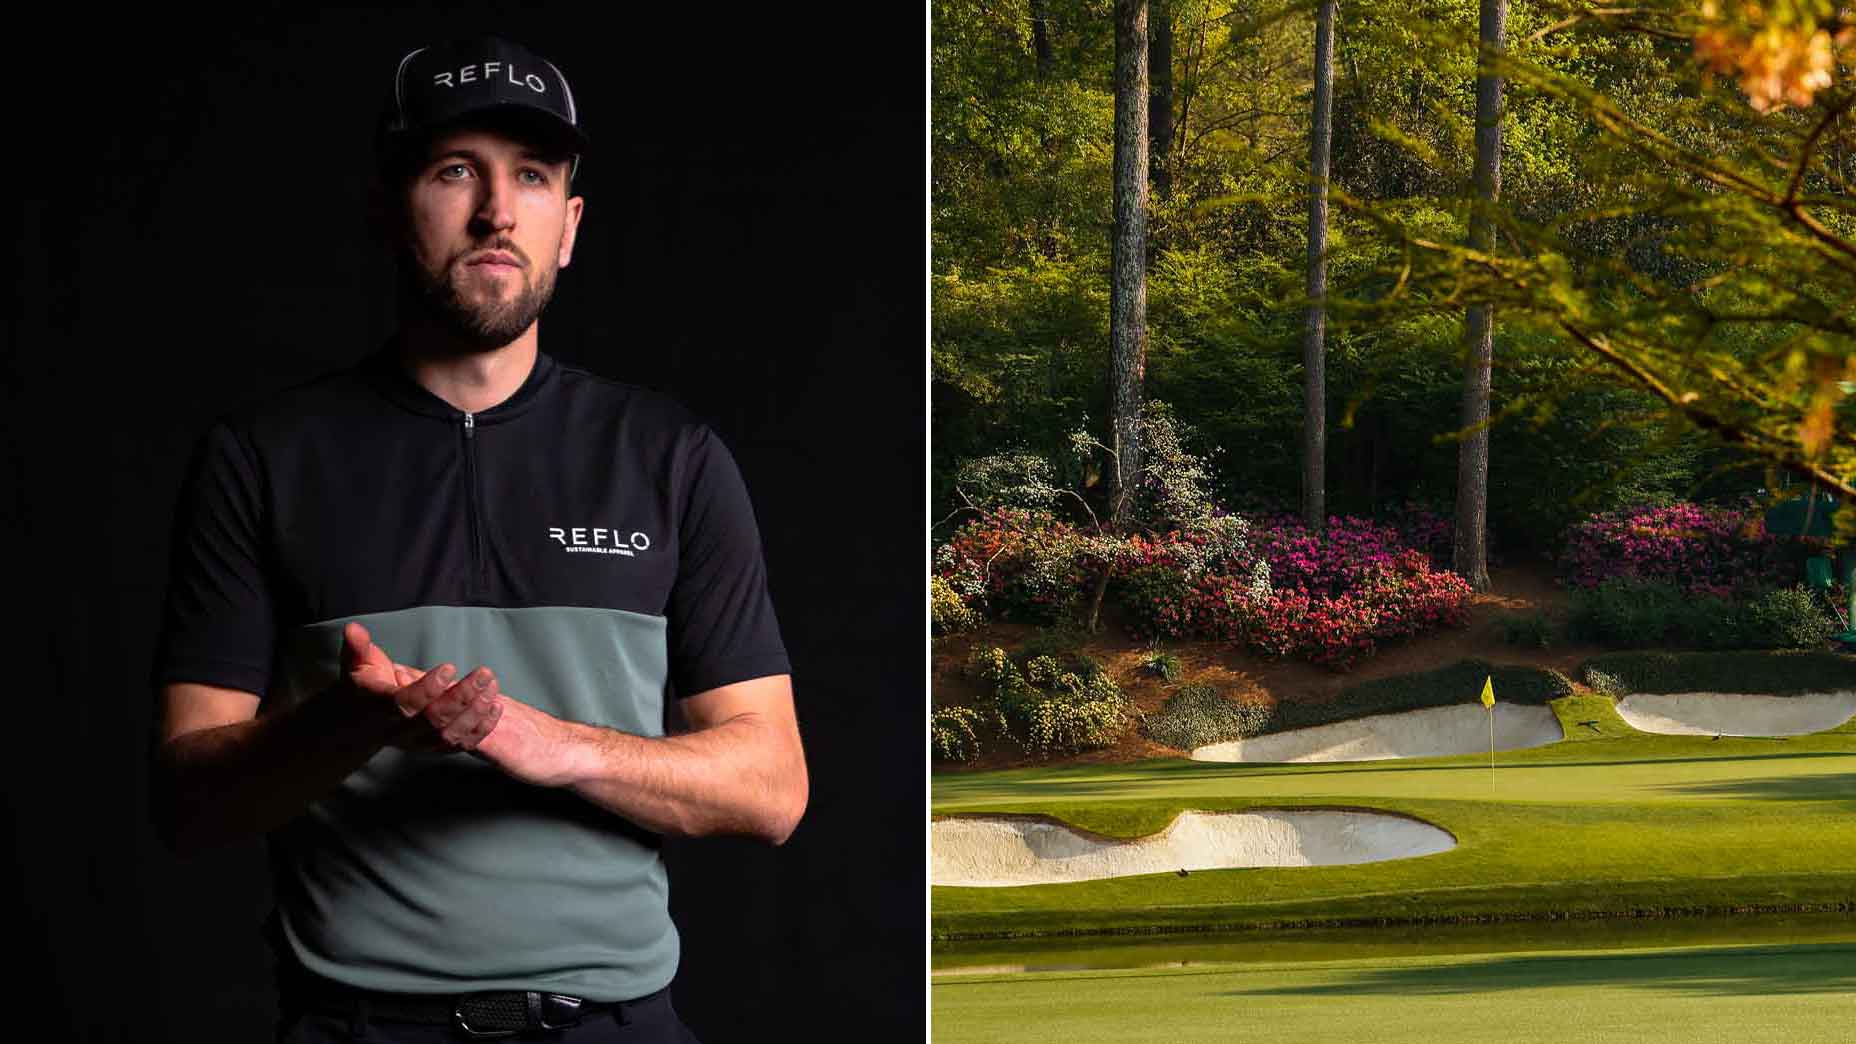 Harry Kane shared a relatable story about his experience on Augusta National's 12th hole.